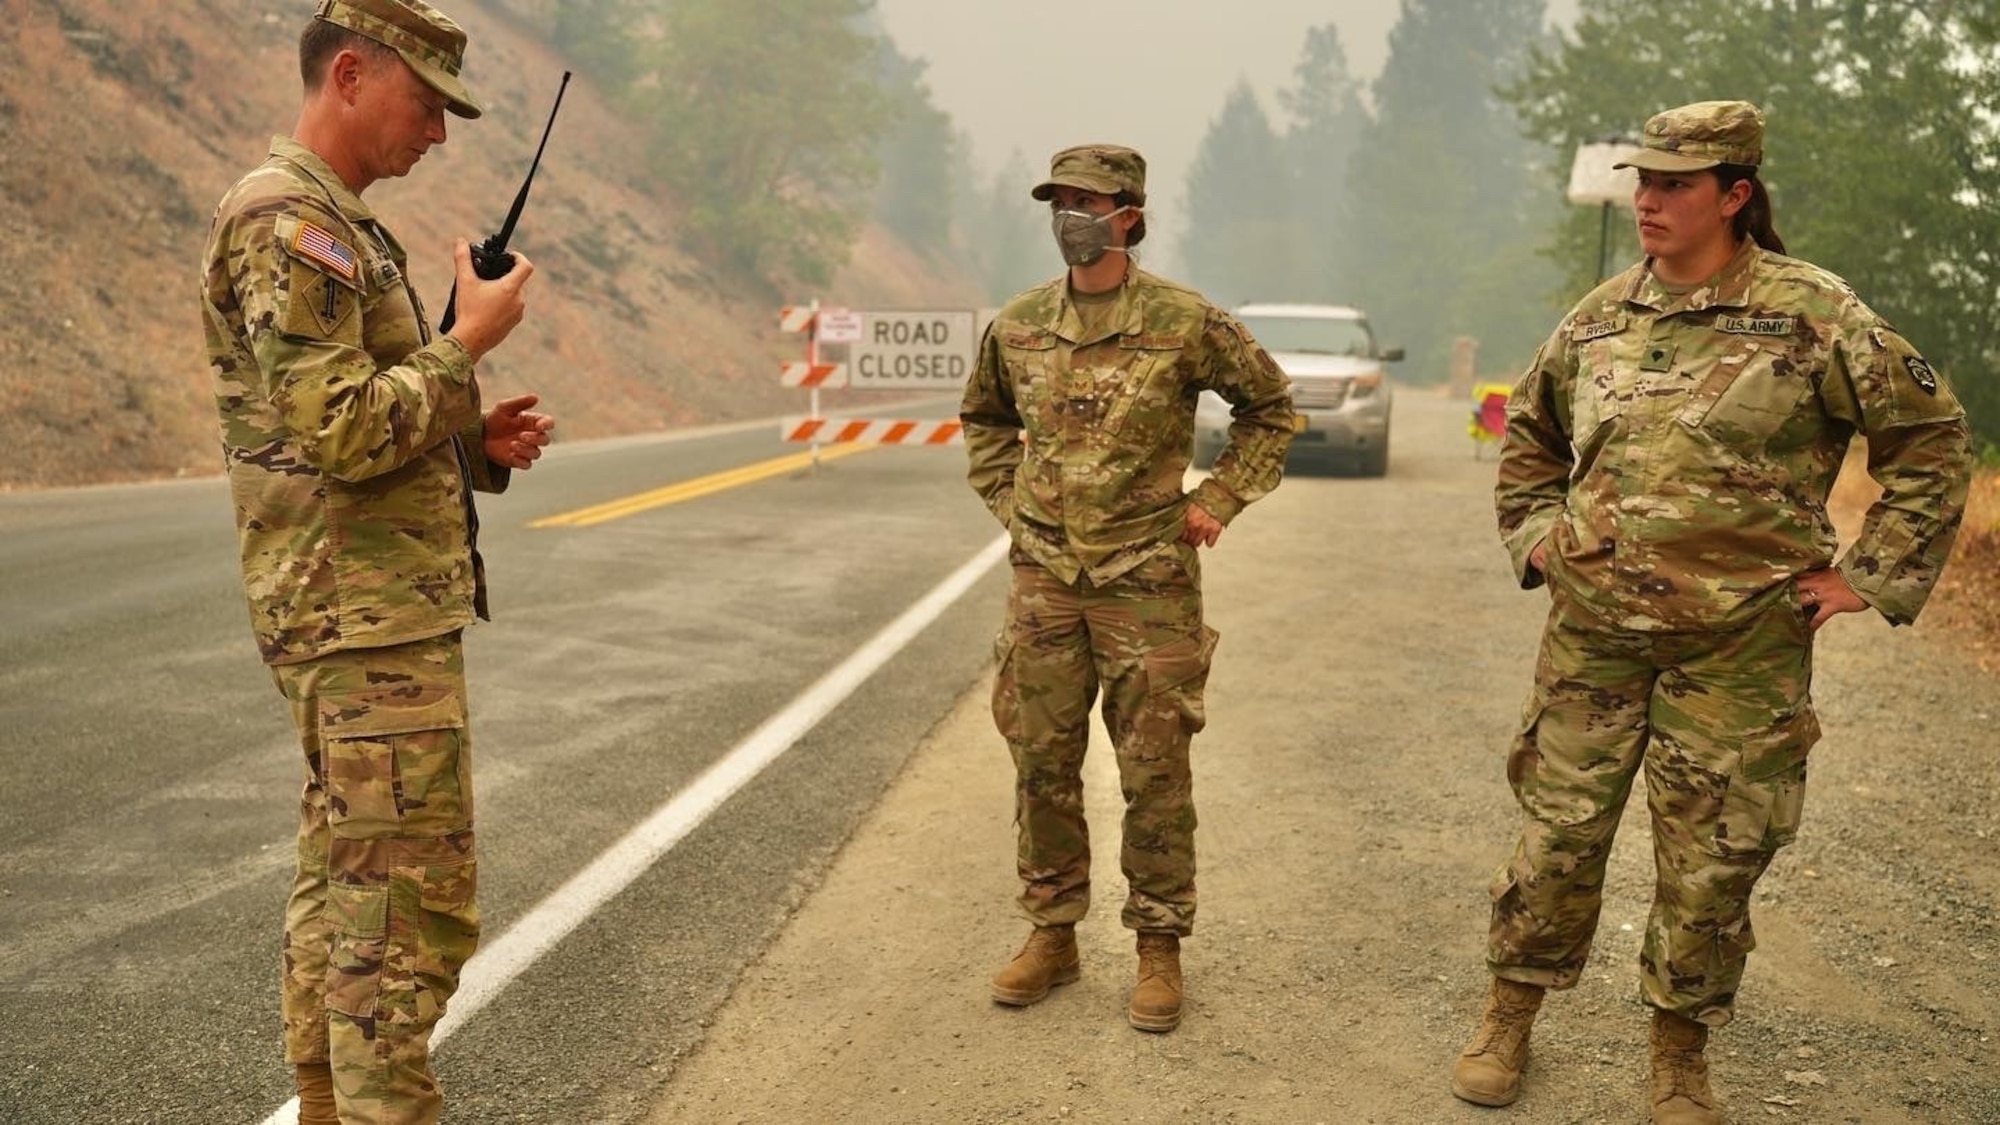 Deep in the Rum Creek Fire Complex area, Sgt. Jeremy Hensler conducts a radio check for Staff Sgt. Casey Reed and Spc. Britney Rivera at a road closure near Merlin, Ore. Sept. 2, 2022. Oregon National Guard members were supporting firefighting efforts at the Rum Creek wildfire.